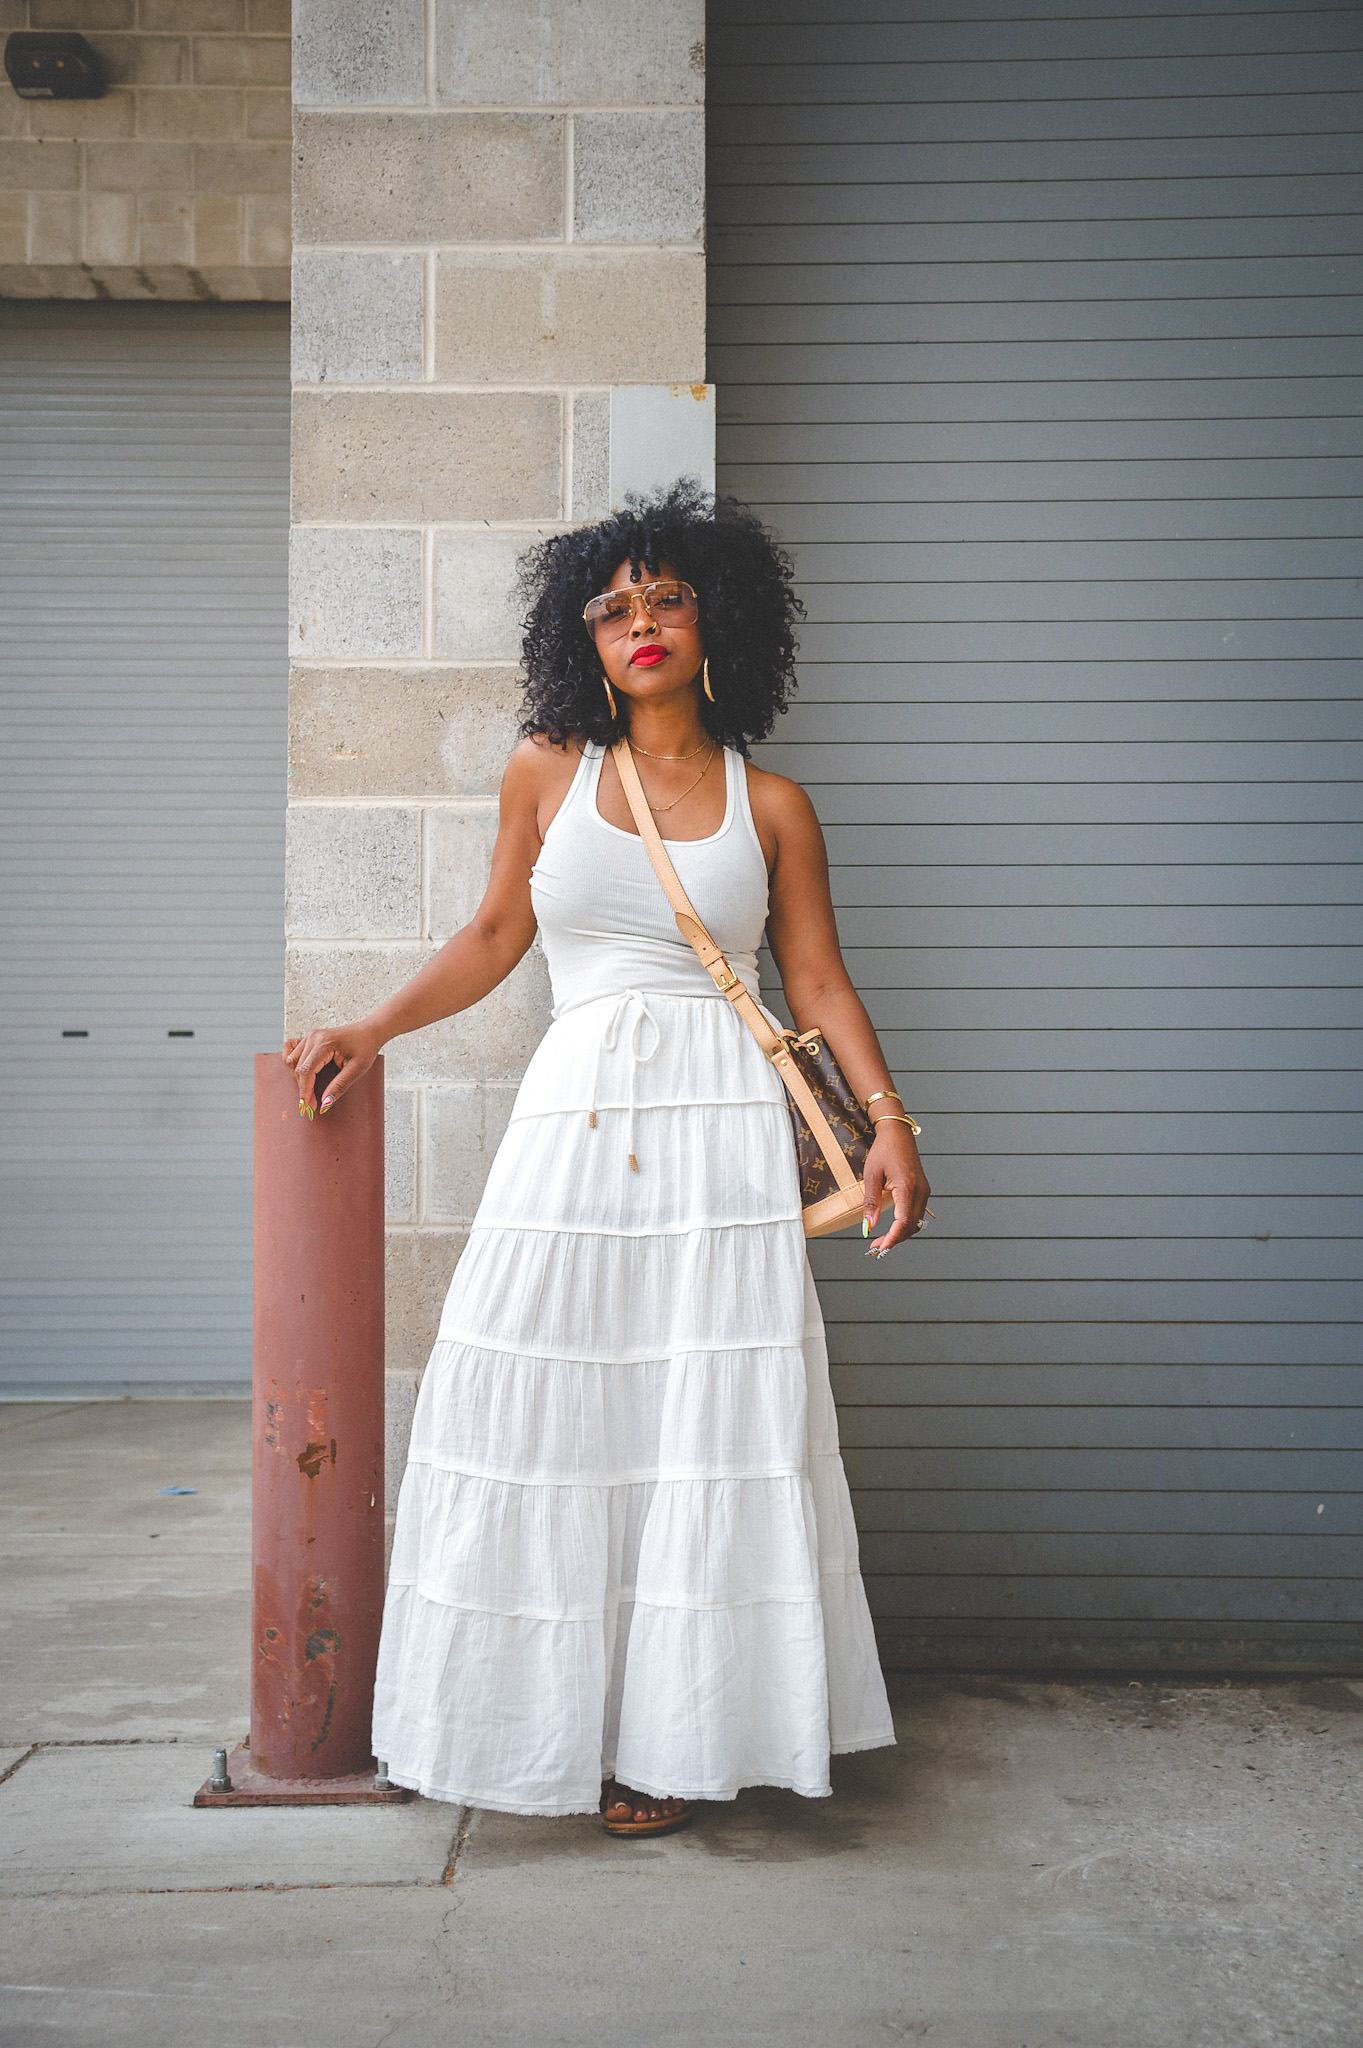 SWEENEE STYLE, FREE PEOPLE STYLE,  SUMMER OUTFIT, HOW TO WEAR CREAM, CREAM SKIRT, MAXI SKIRT OUTFITS, NATURAL HAIRSTYLES, BLOGGER, INDIANAPOLIS BLOGGER, INDIANAPOLIS INFLUENCER, INDIANA FASHION CONTENT CREATOR
